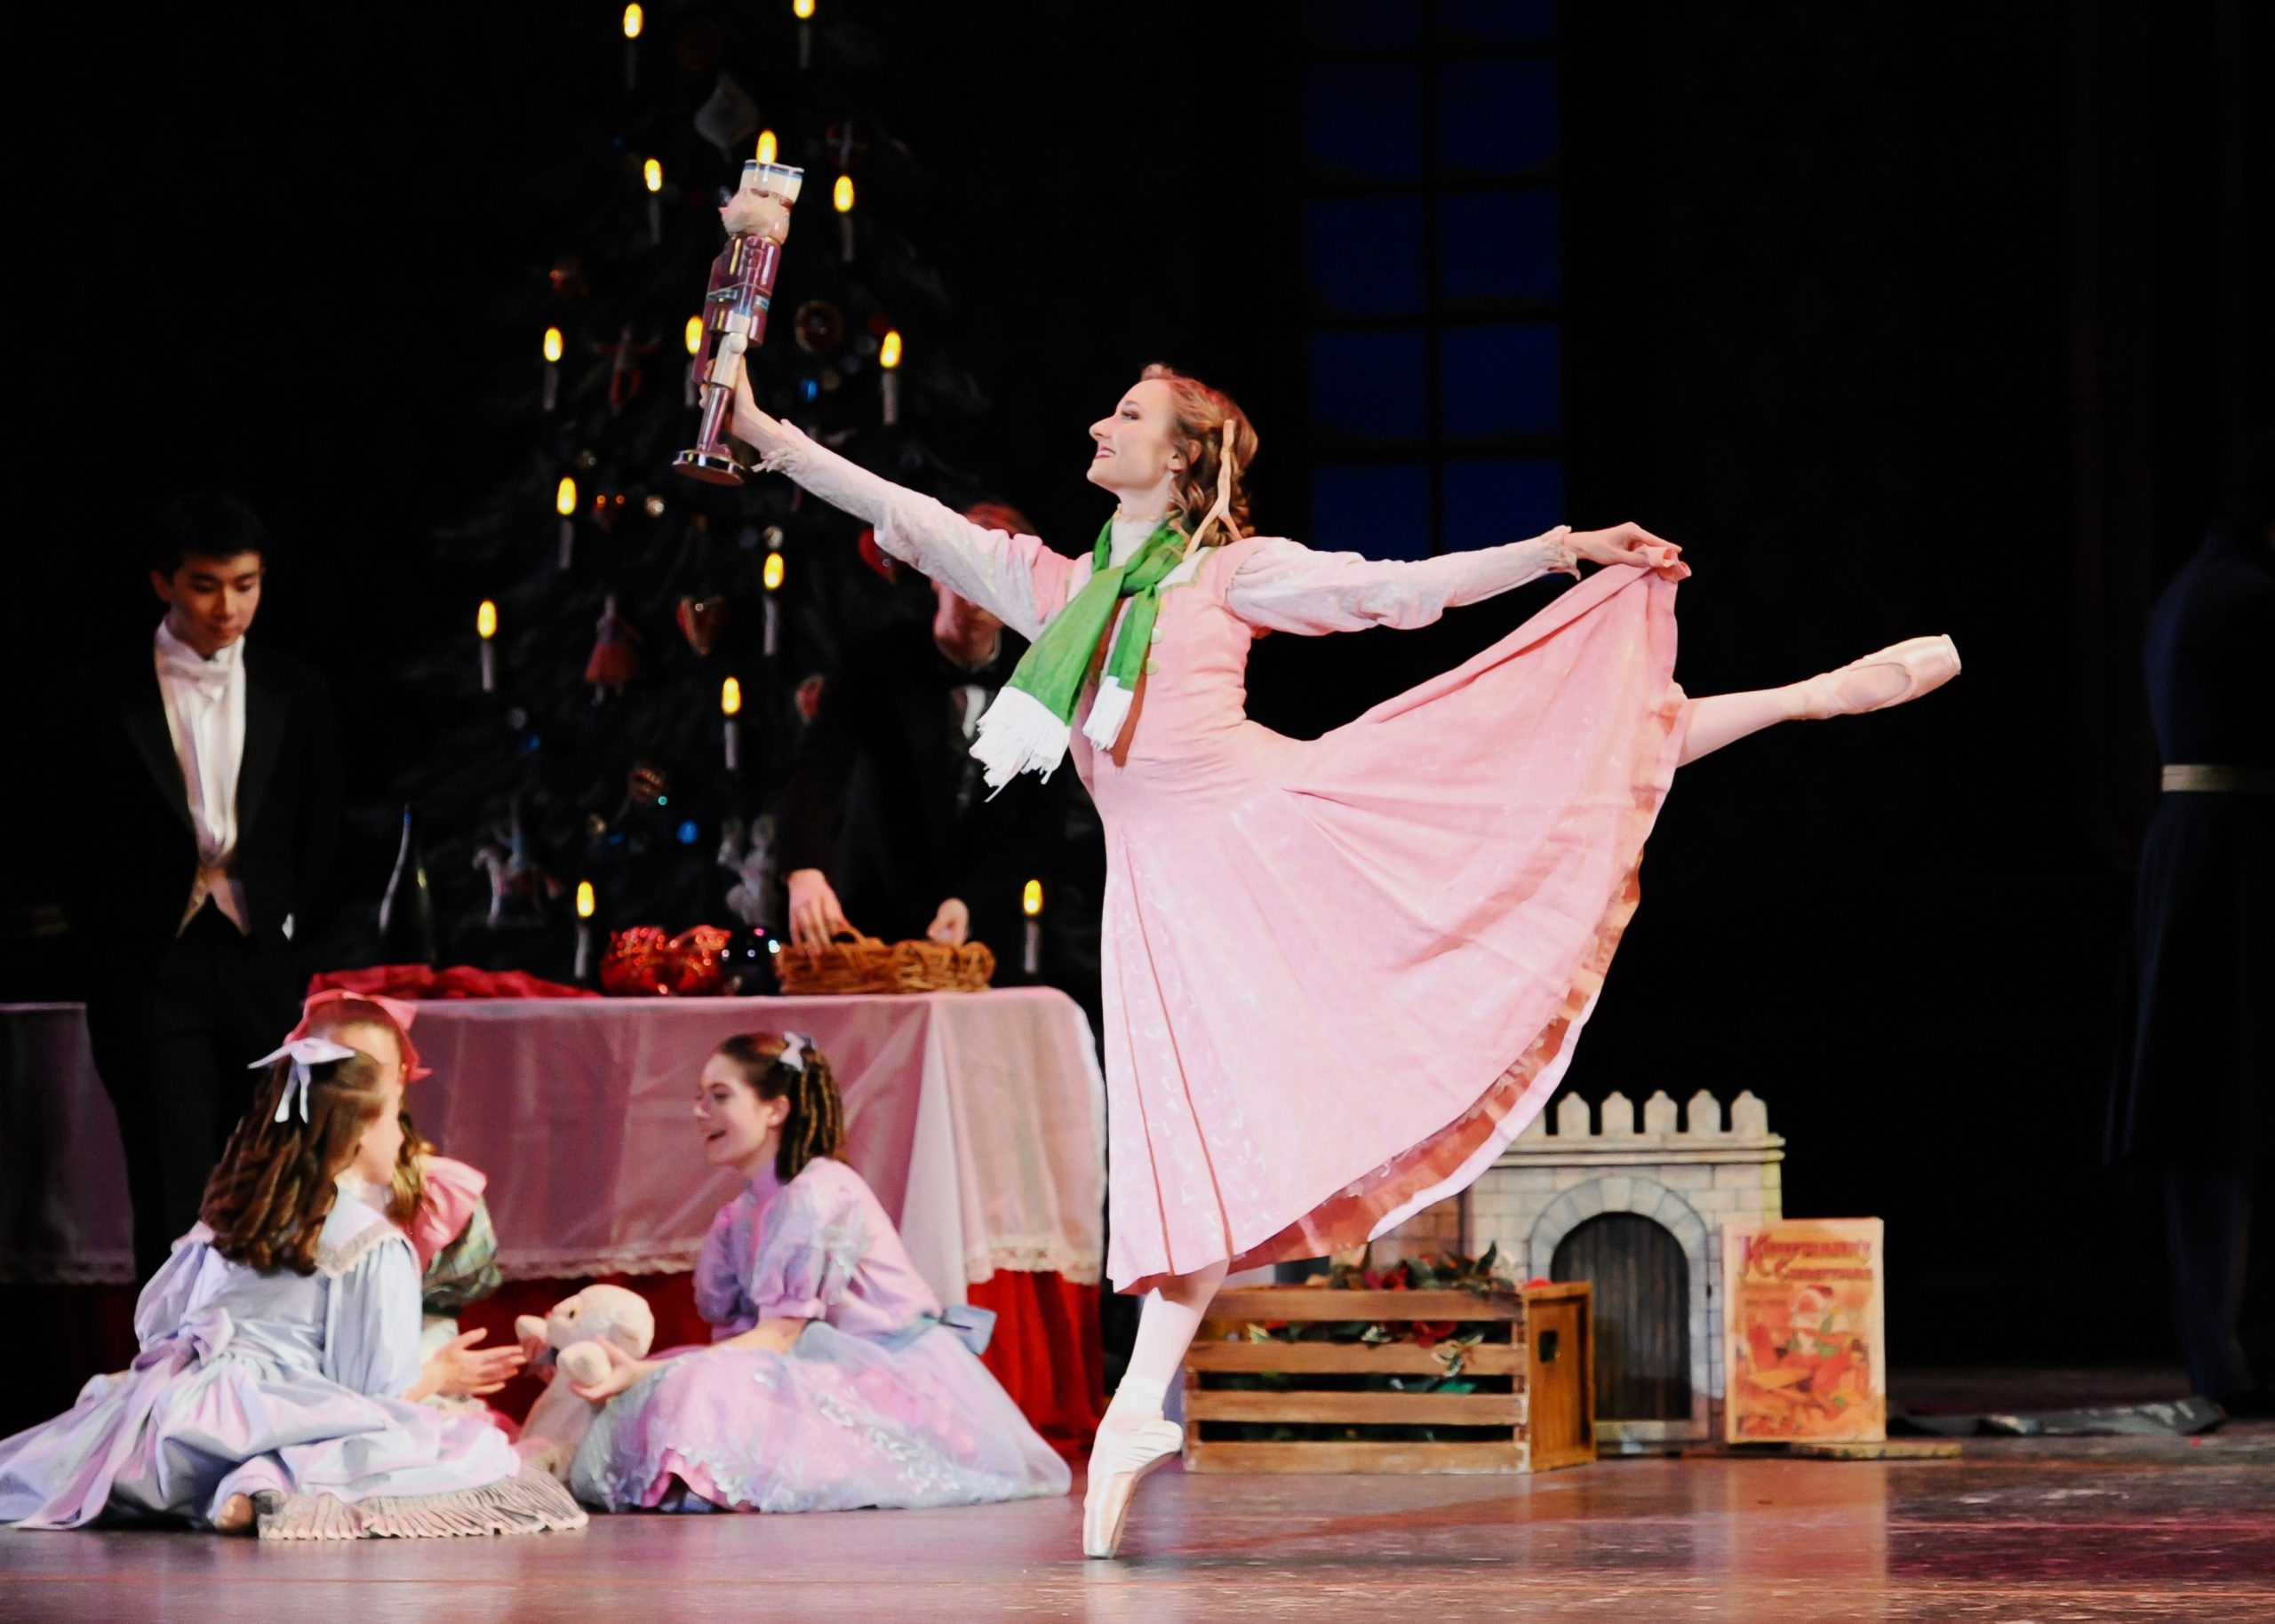 Oh yeah: 'The Nutcracker' is back at Pittsburgh Ballet, as are many other shows in this year's holiday-time theater schedule. (photo: Rich Sofranko)